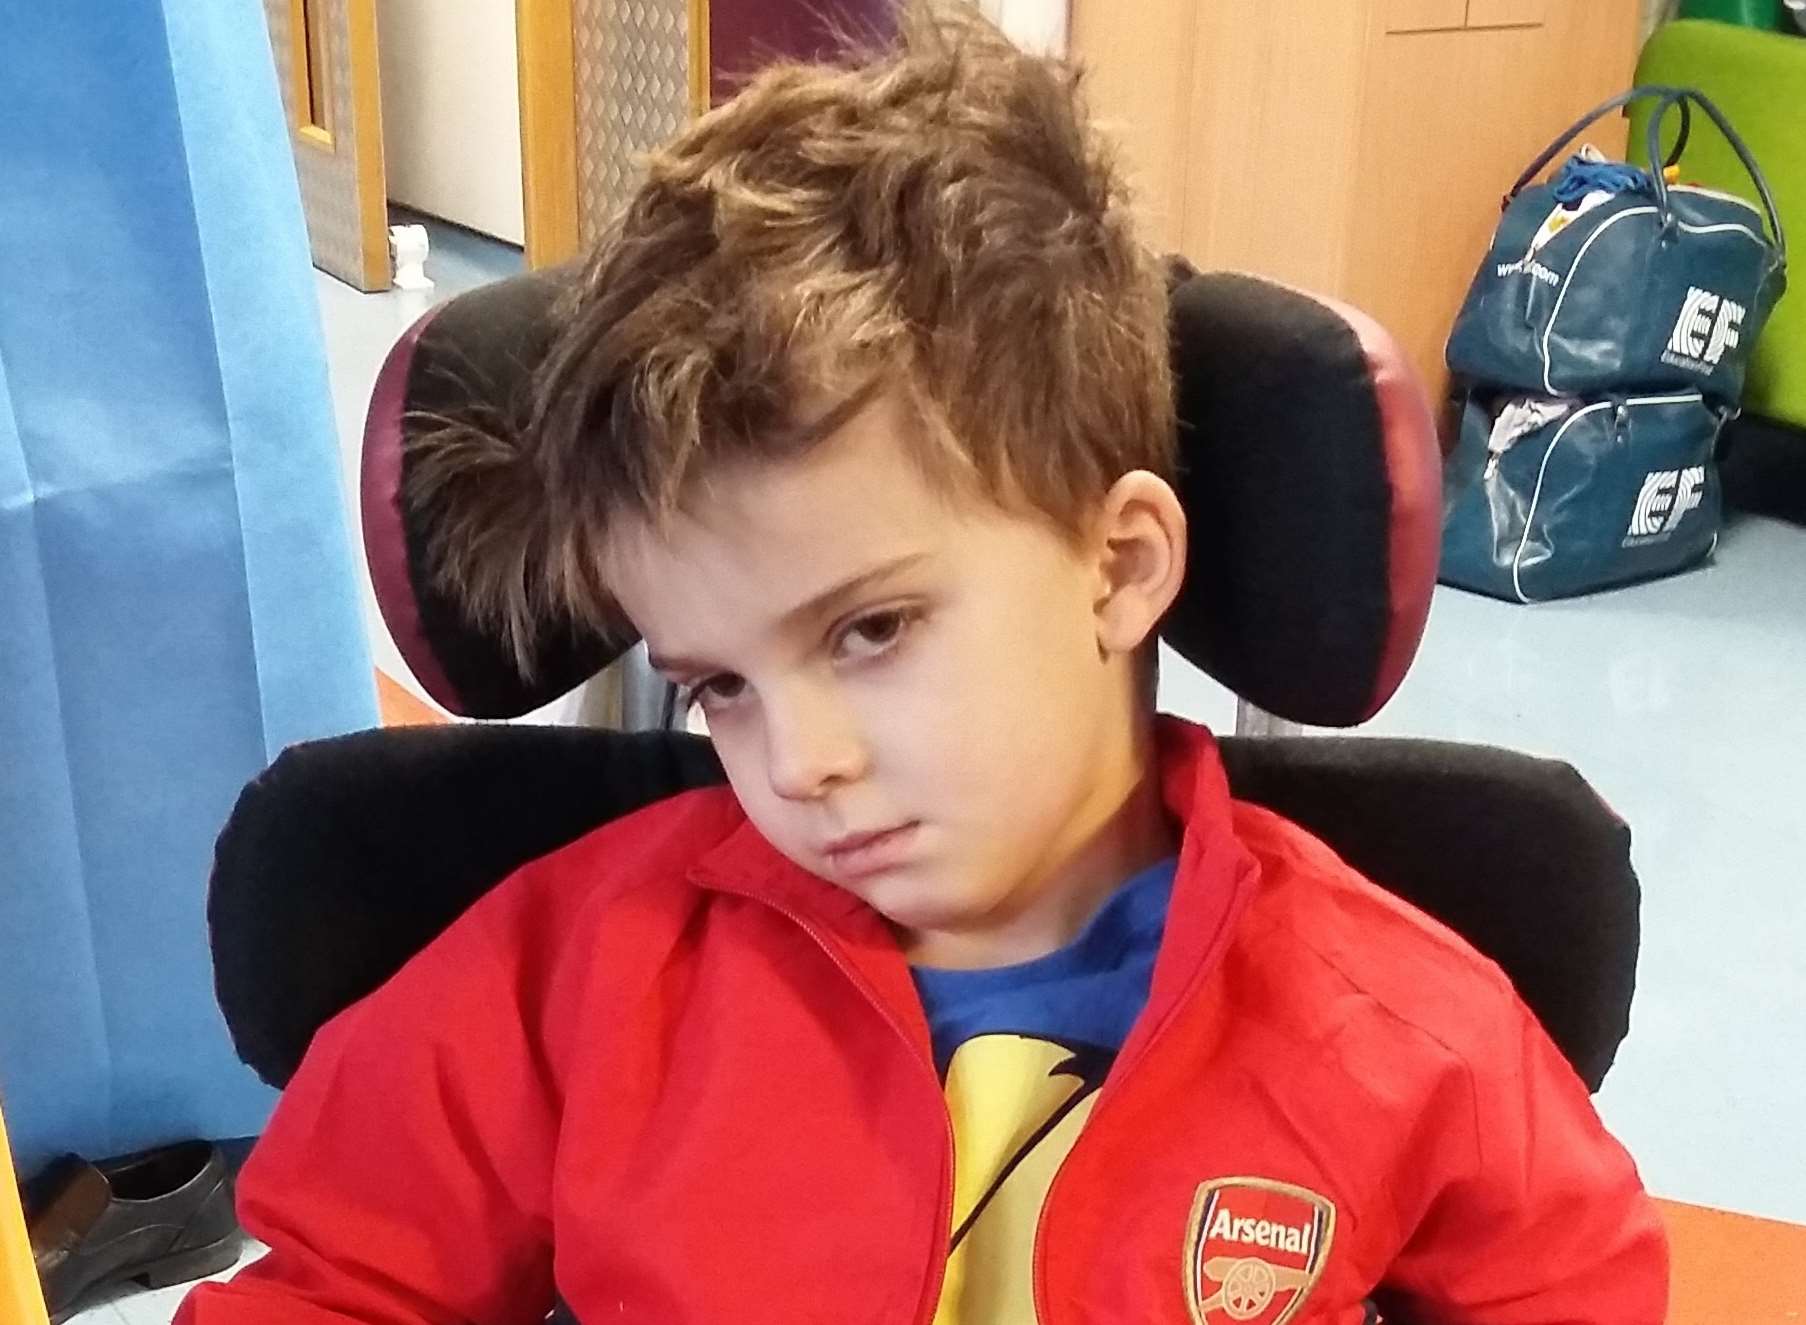 Canterbury boy Samuel Bourdillon was diagnosed with a brain tumour just before his fifth birthday